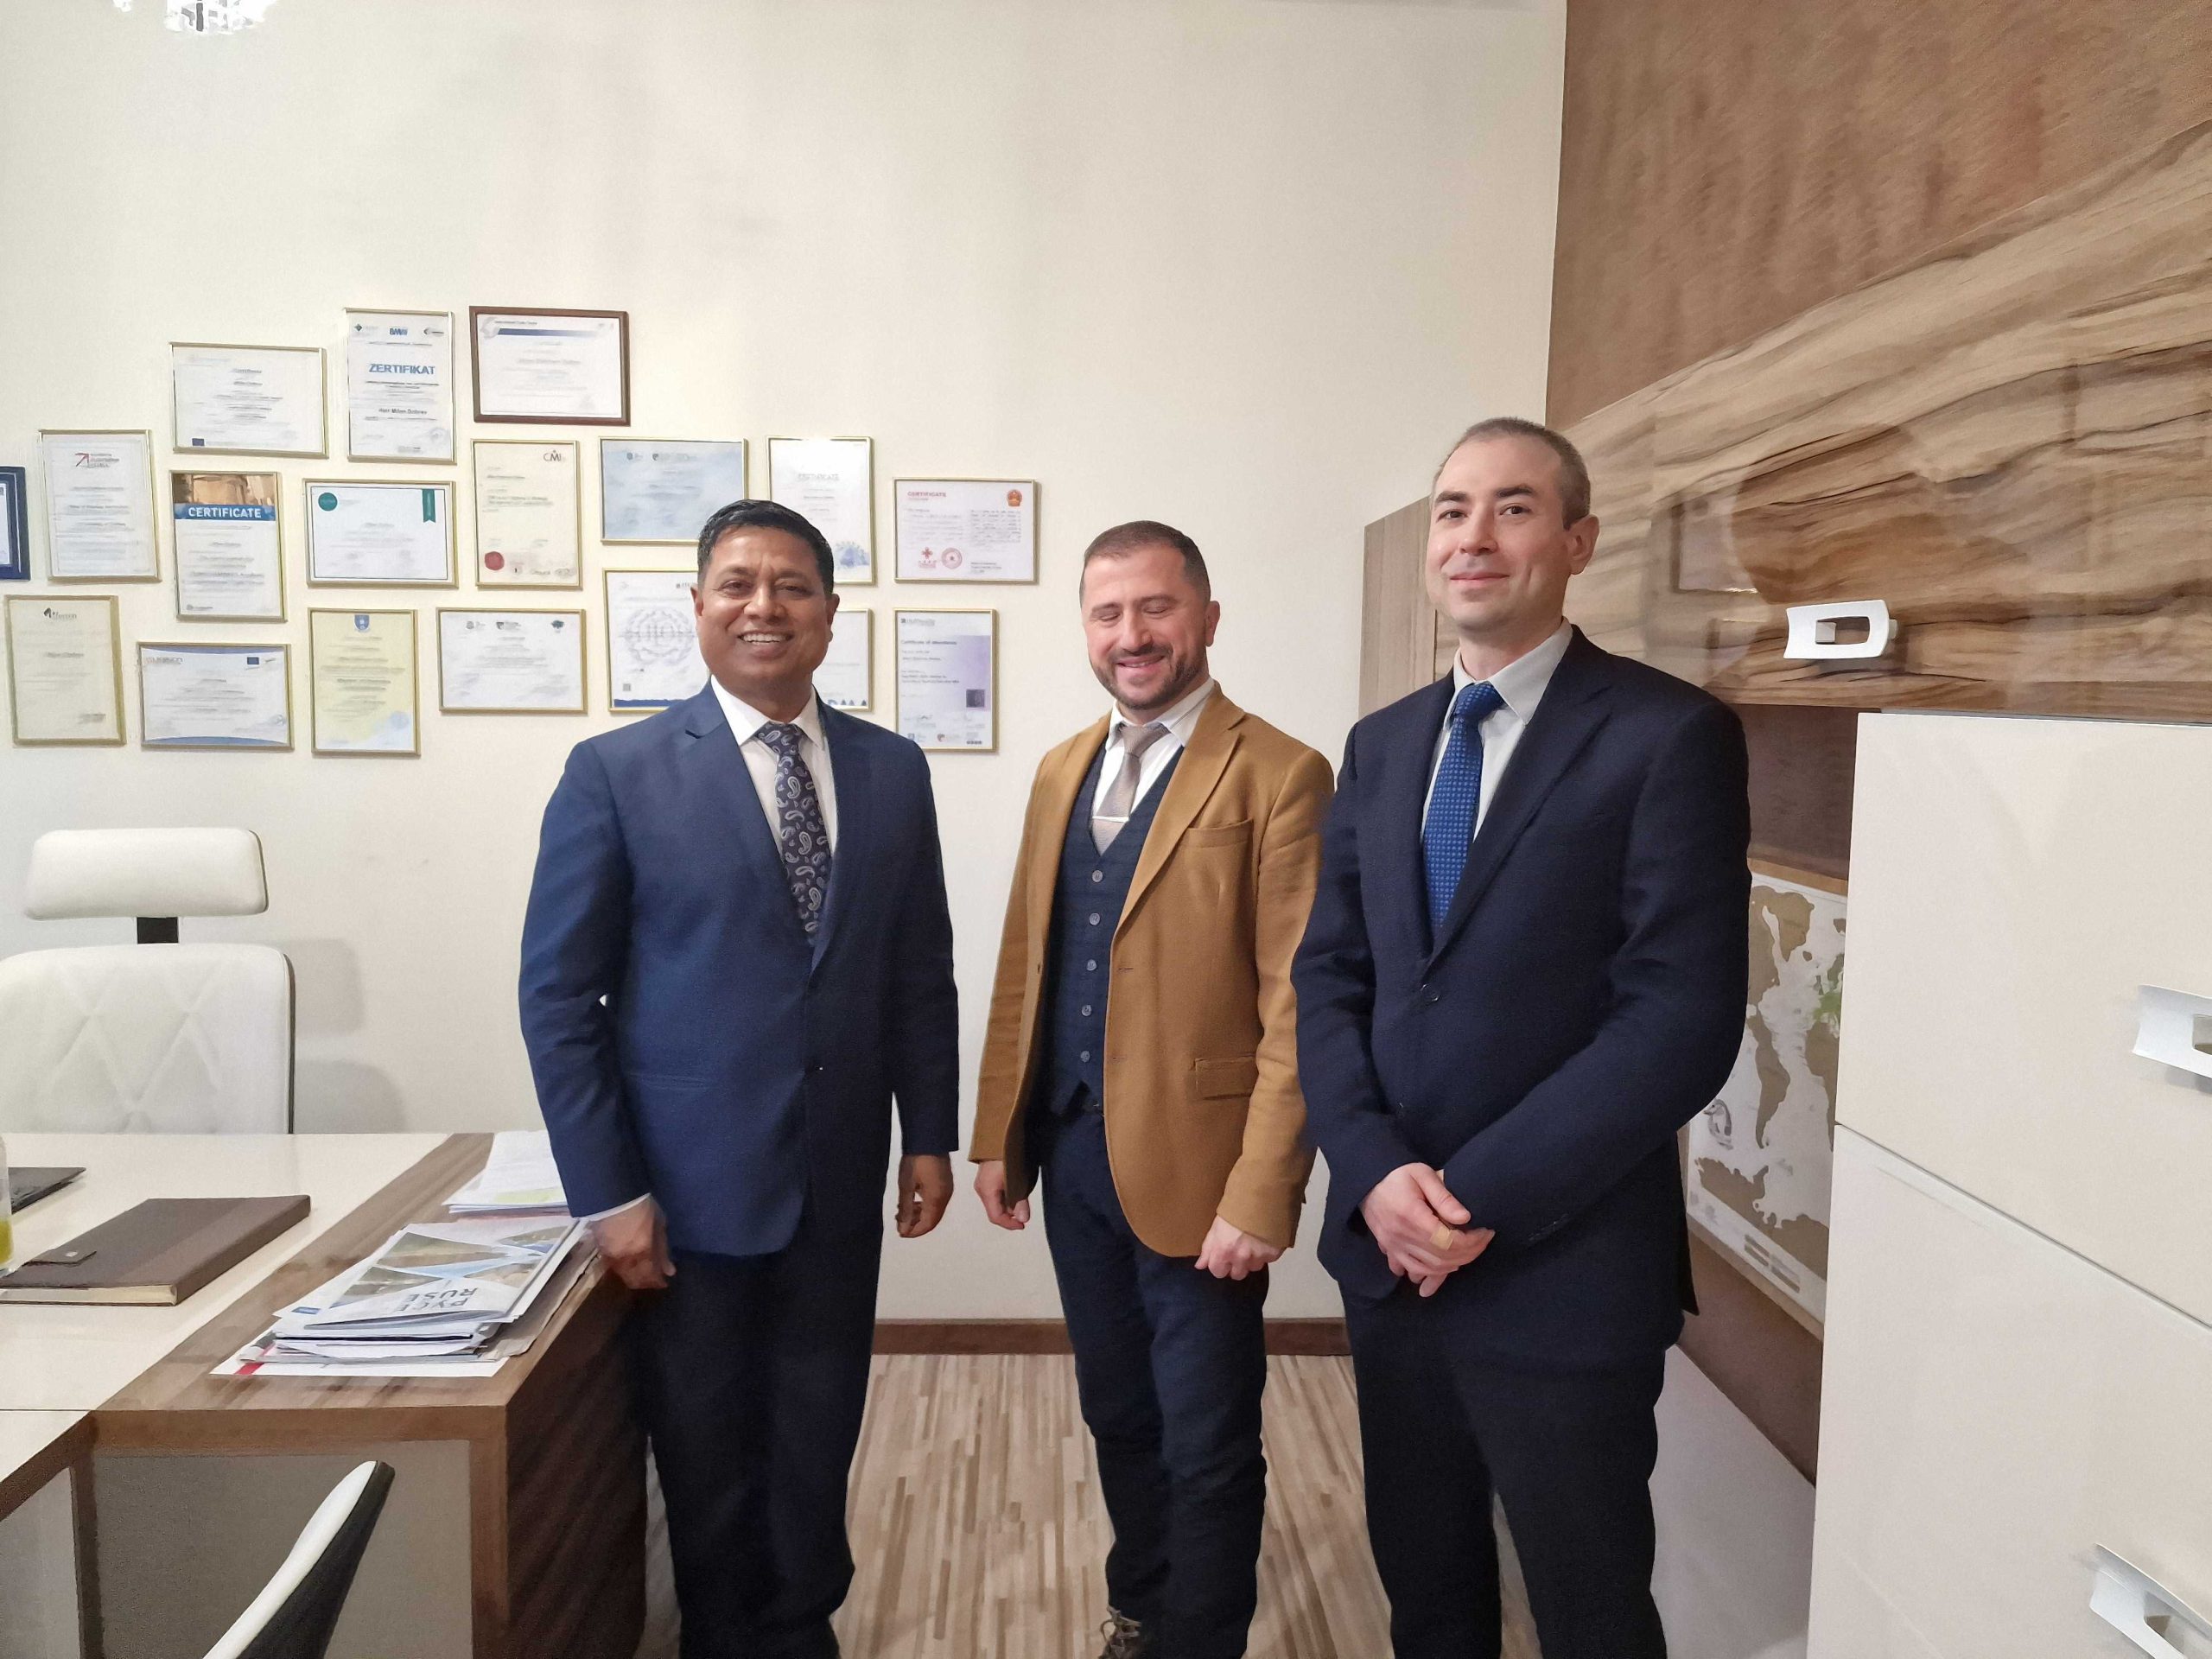 Visit of His Excellency Sanjay Rana strengthens business ties between Bulgaria and India